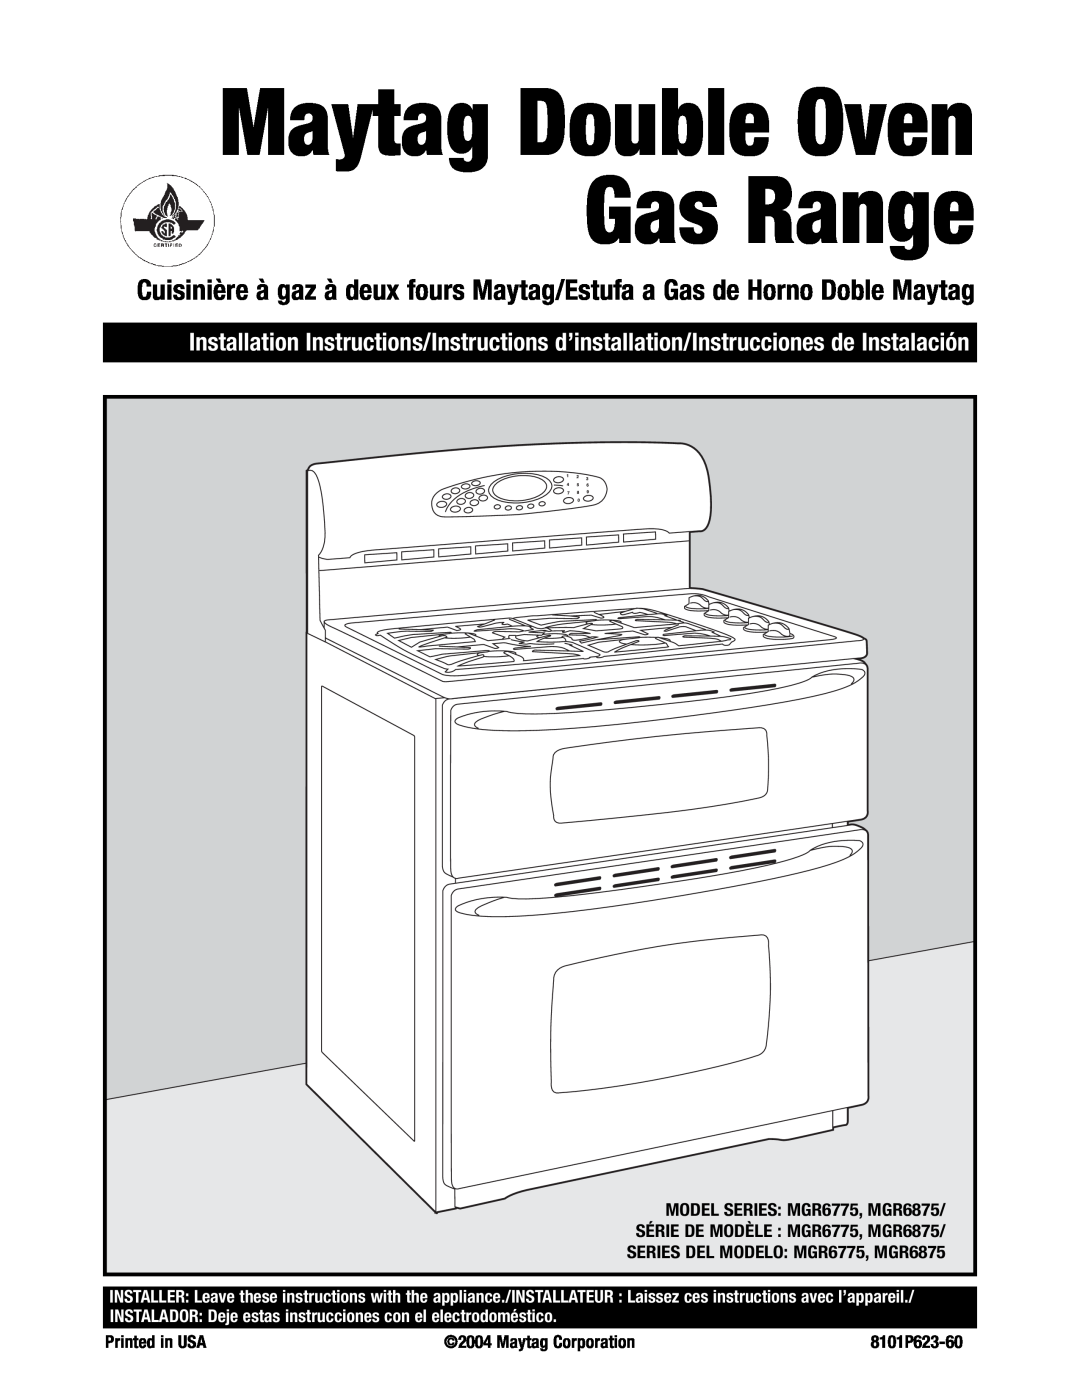 Maytag installation instructions Maytag Double Oven Gas Range, MODEL SERIES MGR6775, MGR6875, Maytag Corporation 